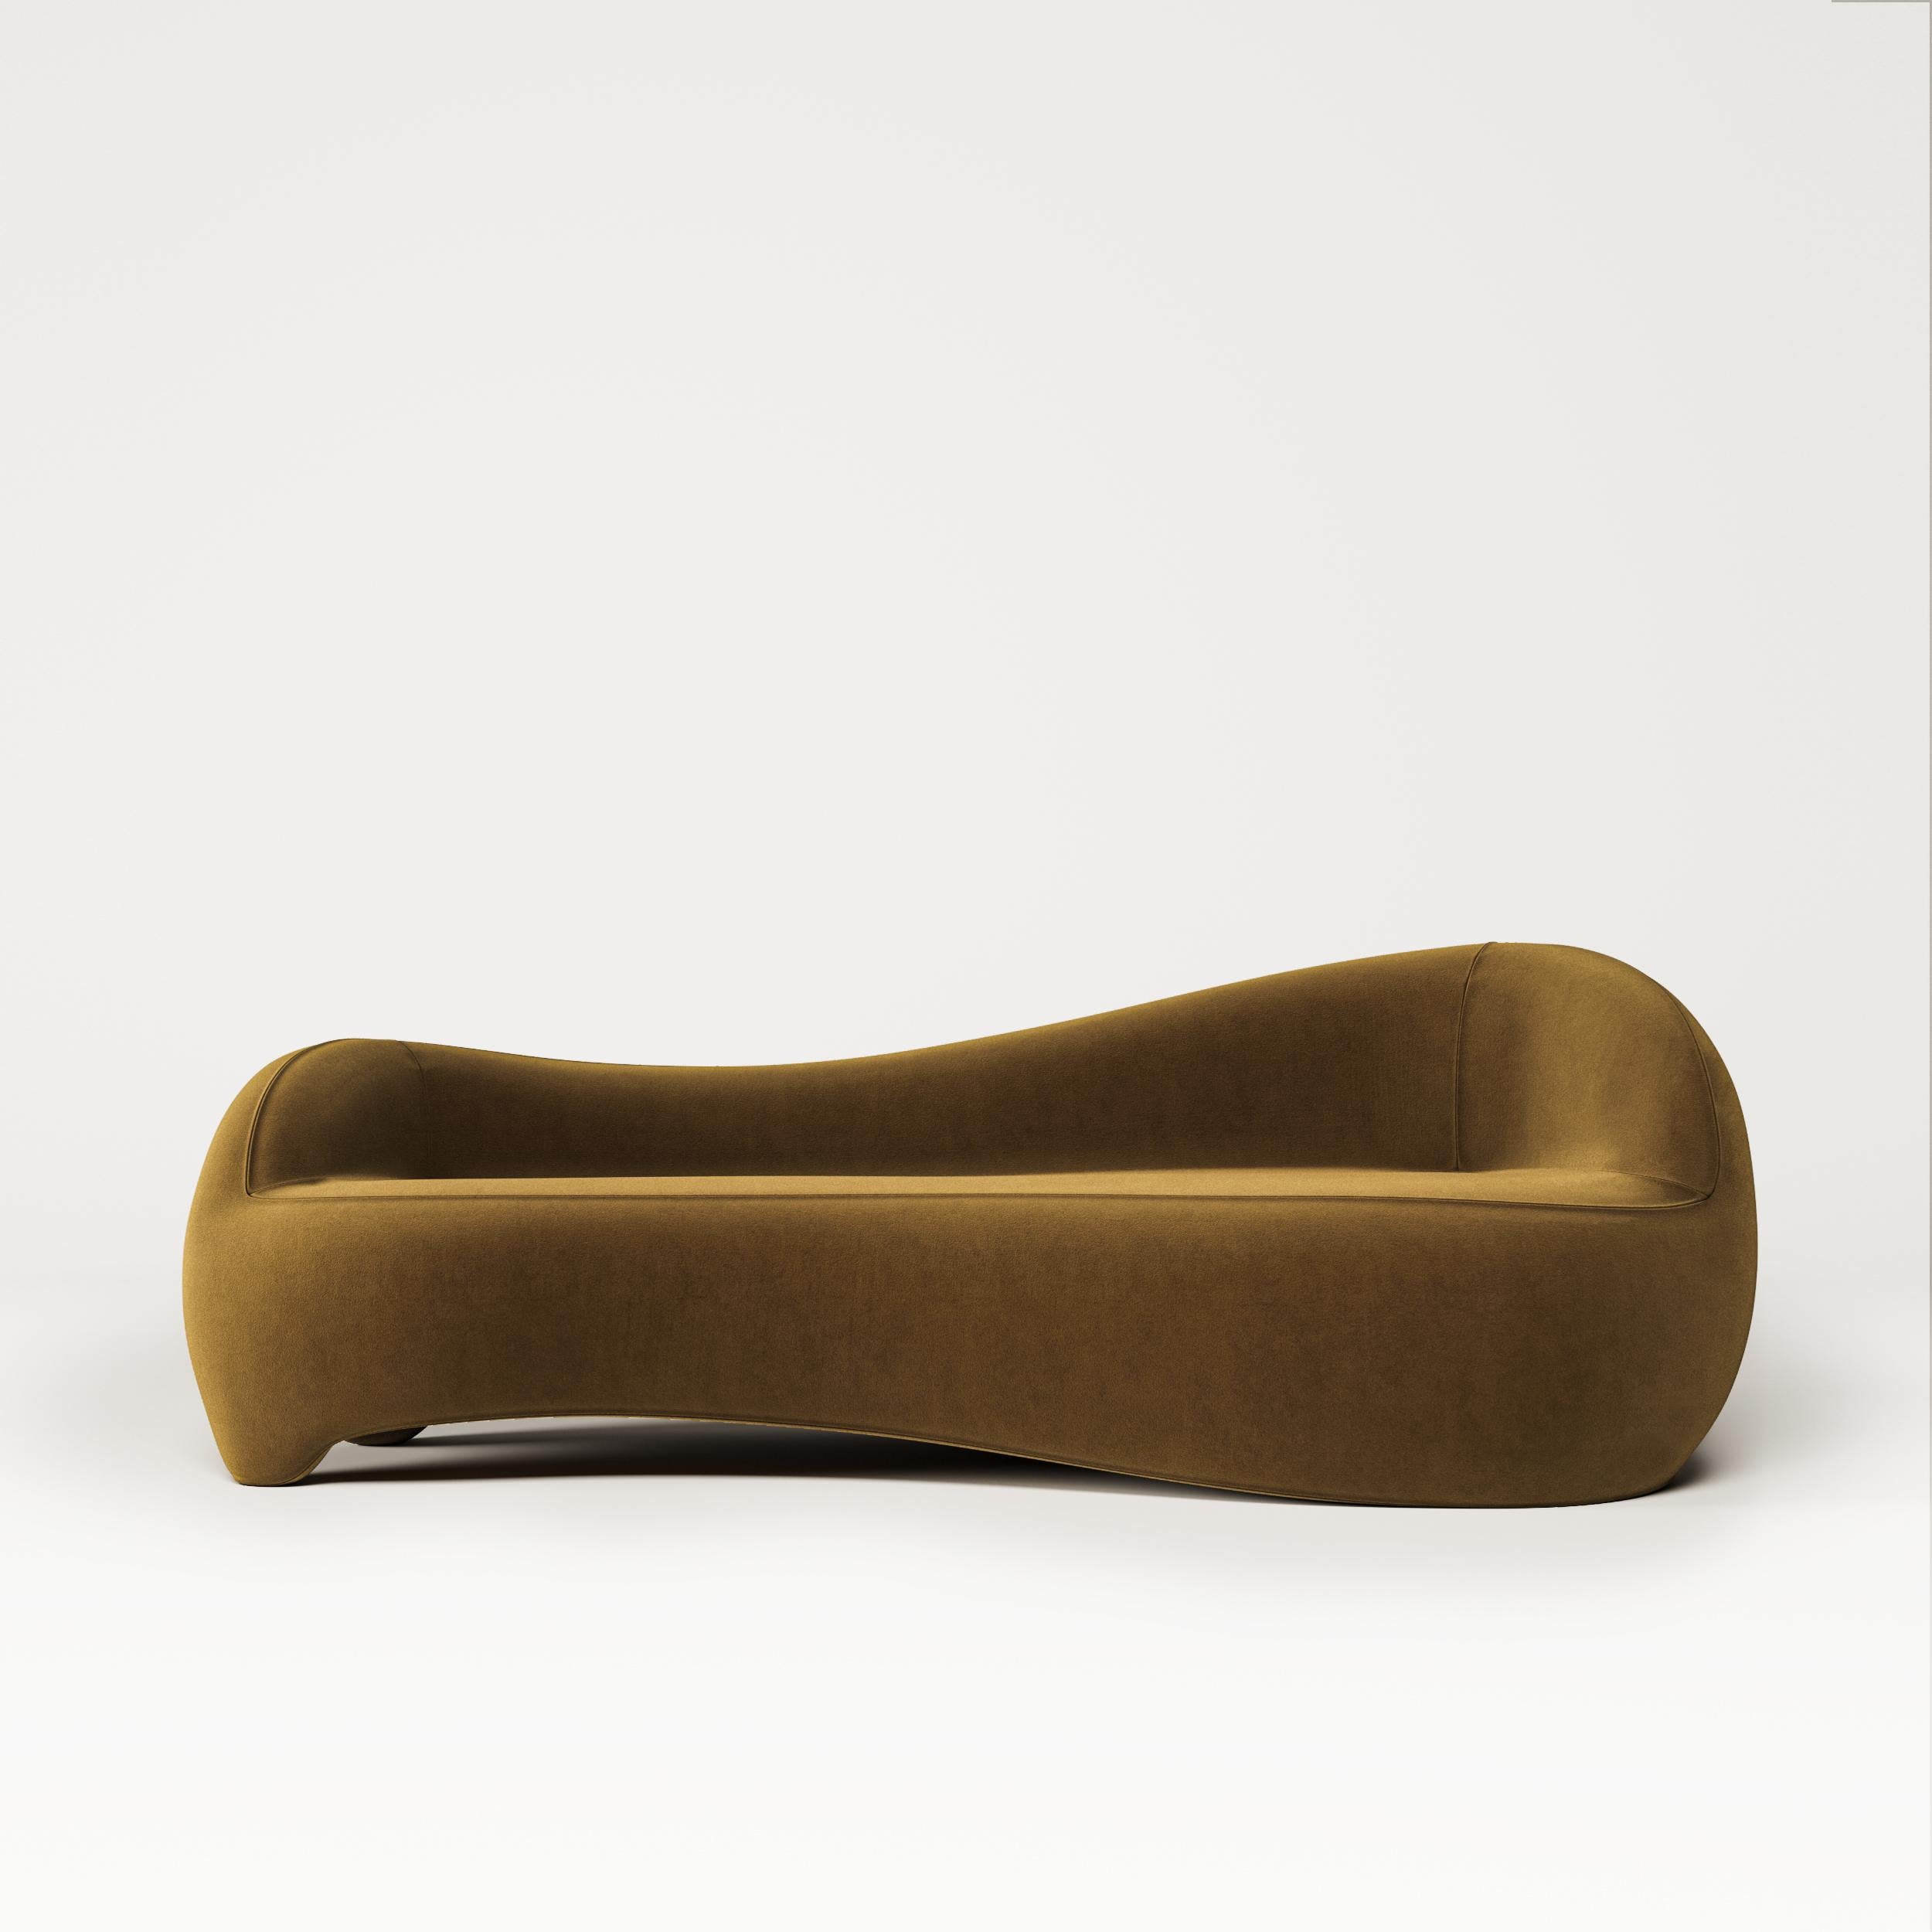 Pal_Up sofa

Mehmet Orel, who designed the Pal_up sofa, designed as a continuation of the Paloma series, also pays homage to Gaetono Pesce with this design.

While designing the Up series, Pesce made references to the place and bondage of women